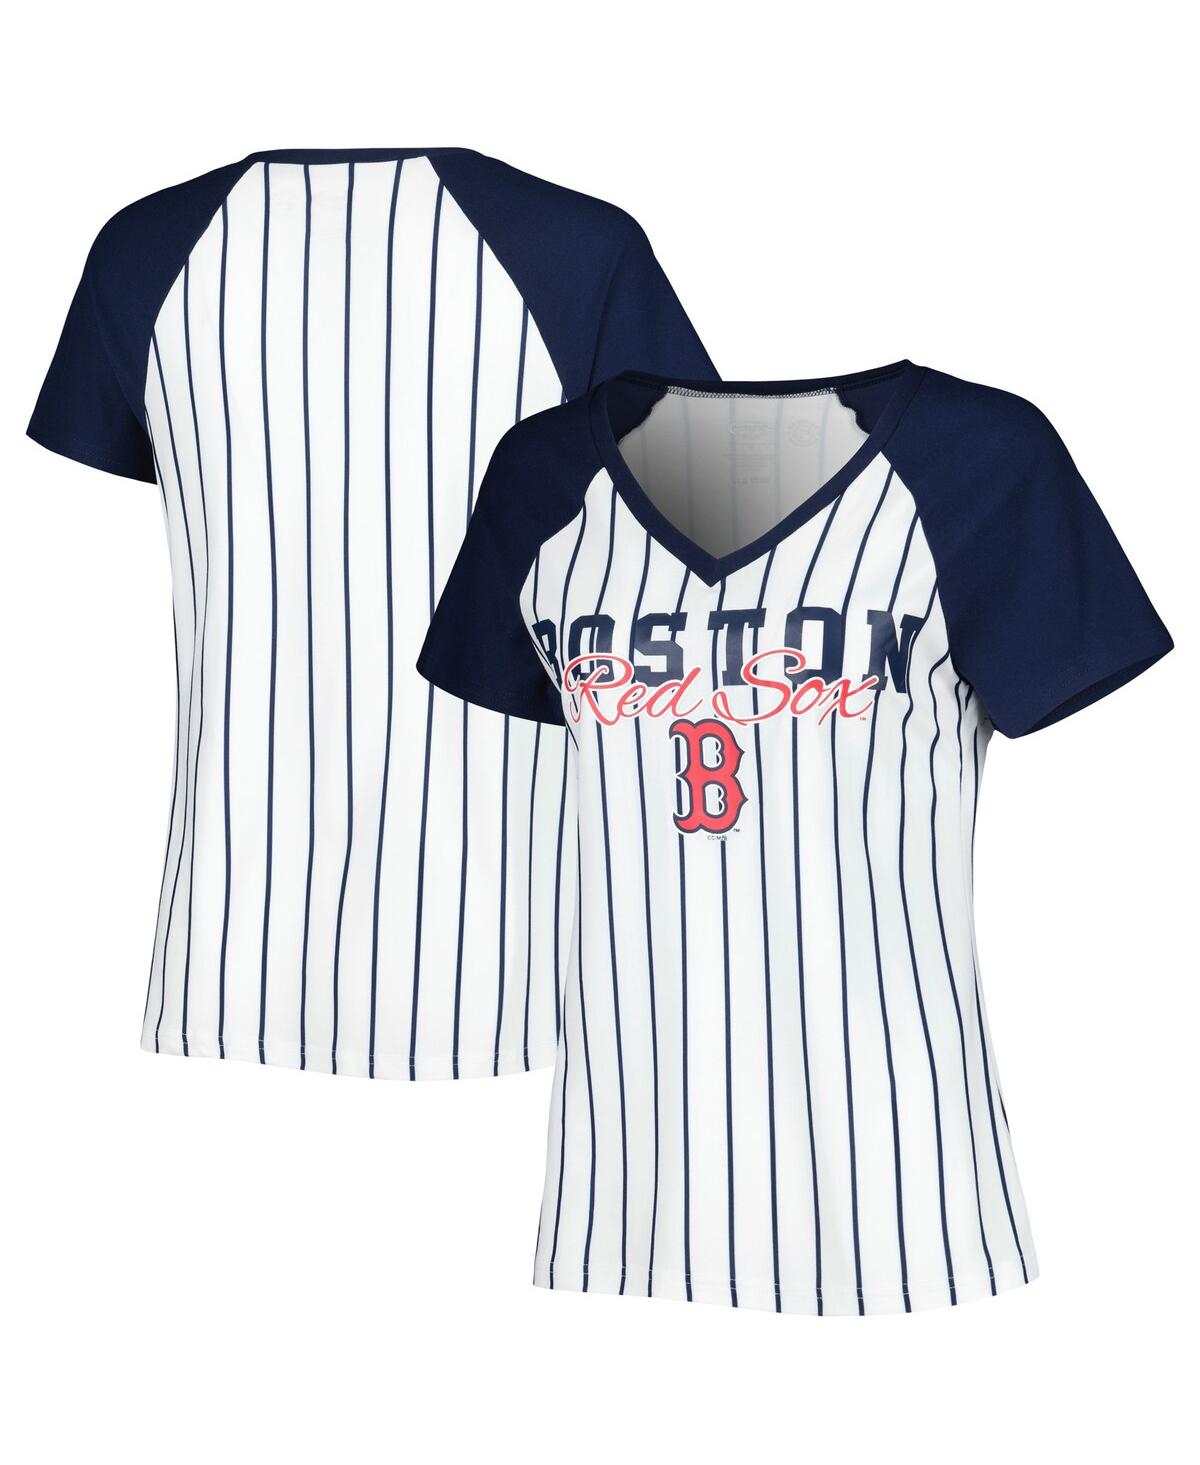 CONCEPTS SPORT WOMEN'S CONCEPTS SPORT WHITE BOSTON RED SOX REEL PINSTRIPE NIGHTSHIRT